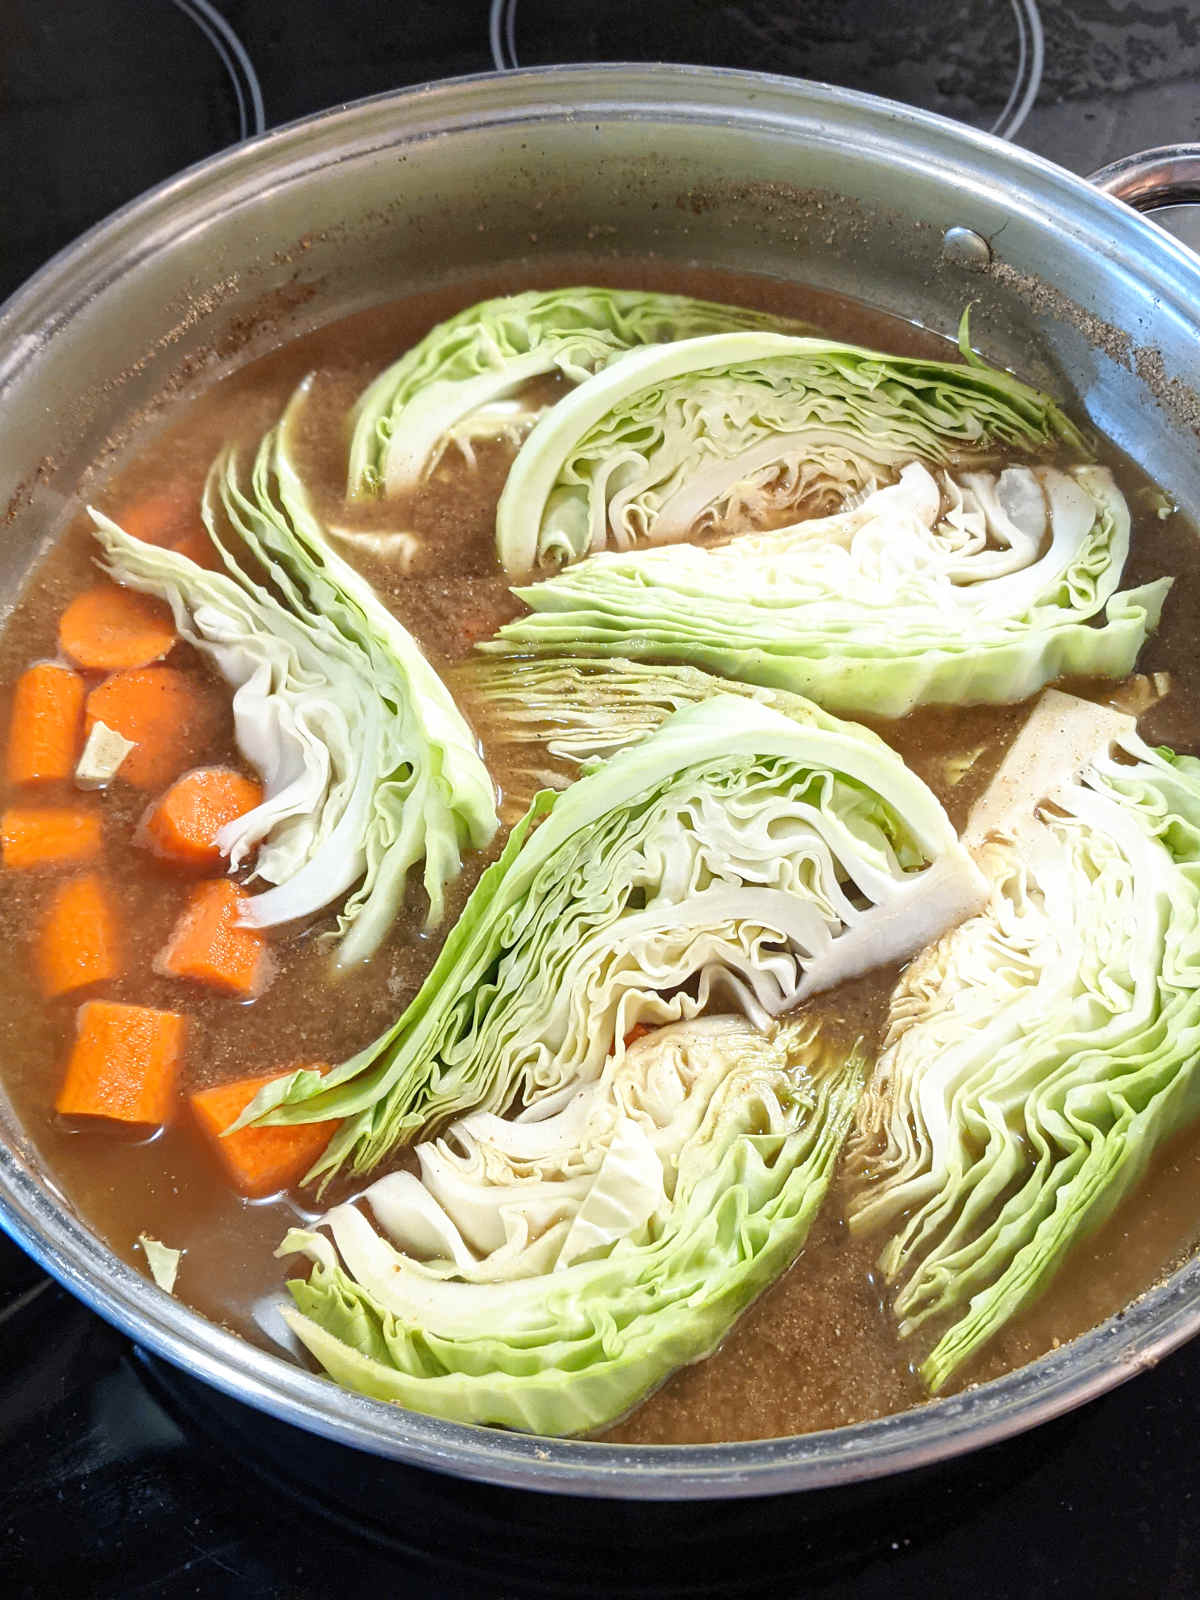 Braised cabbage and carrots in broth.